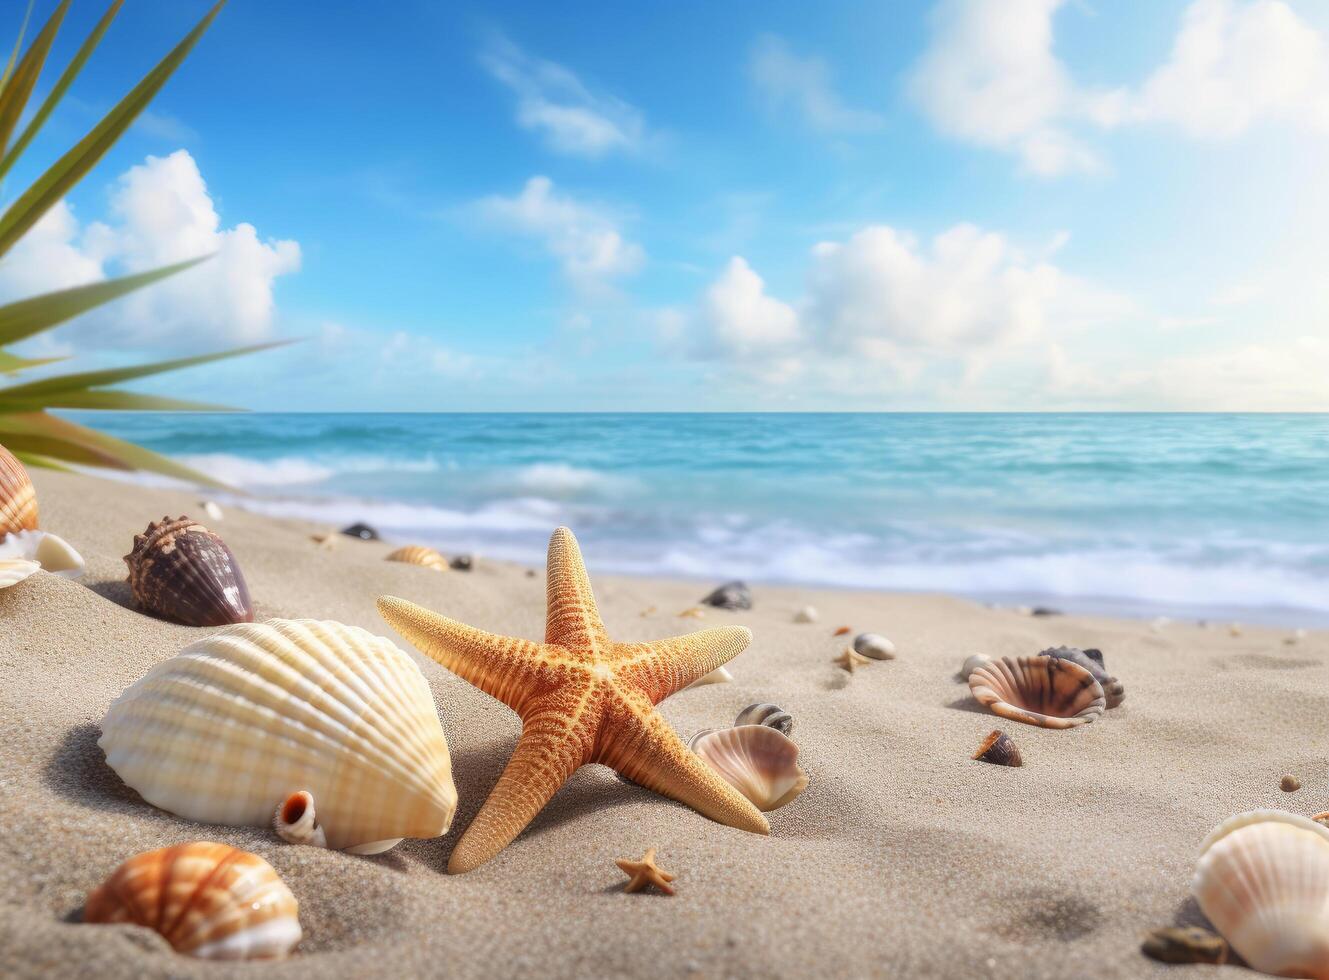 Beach sand with stars and shells. Illustration photo